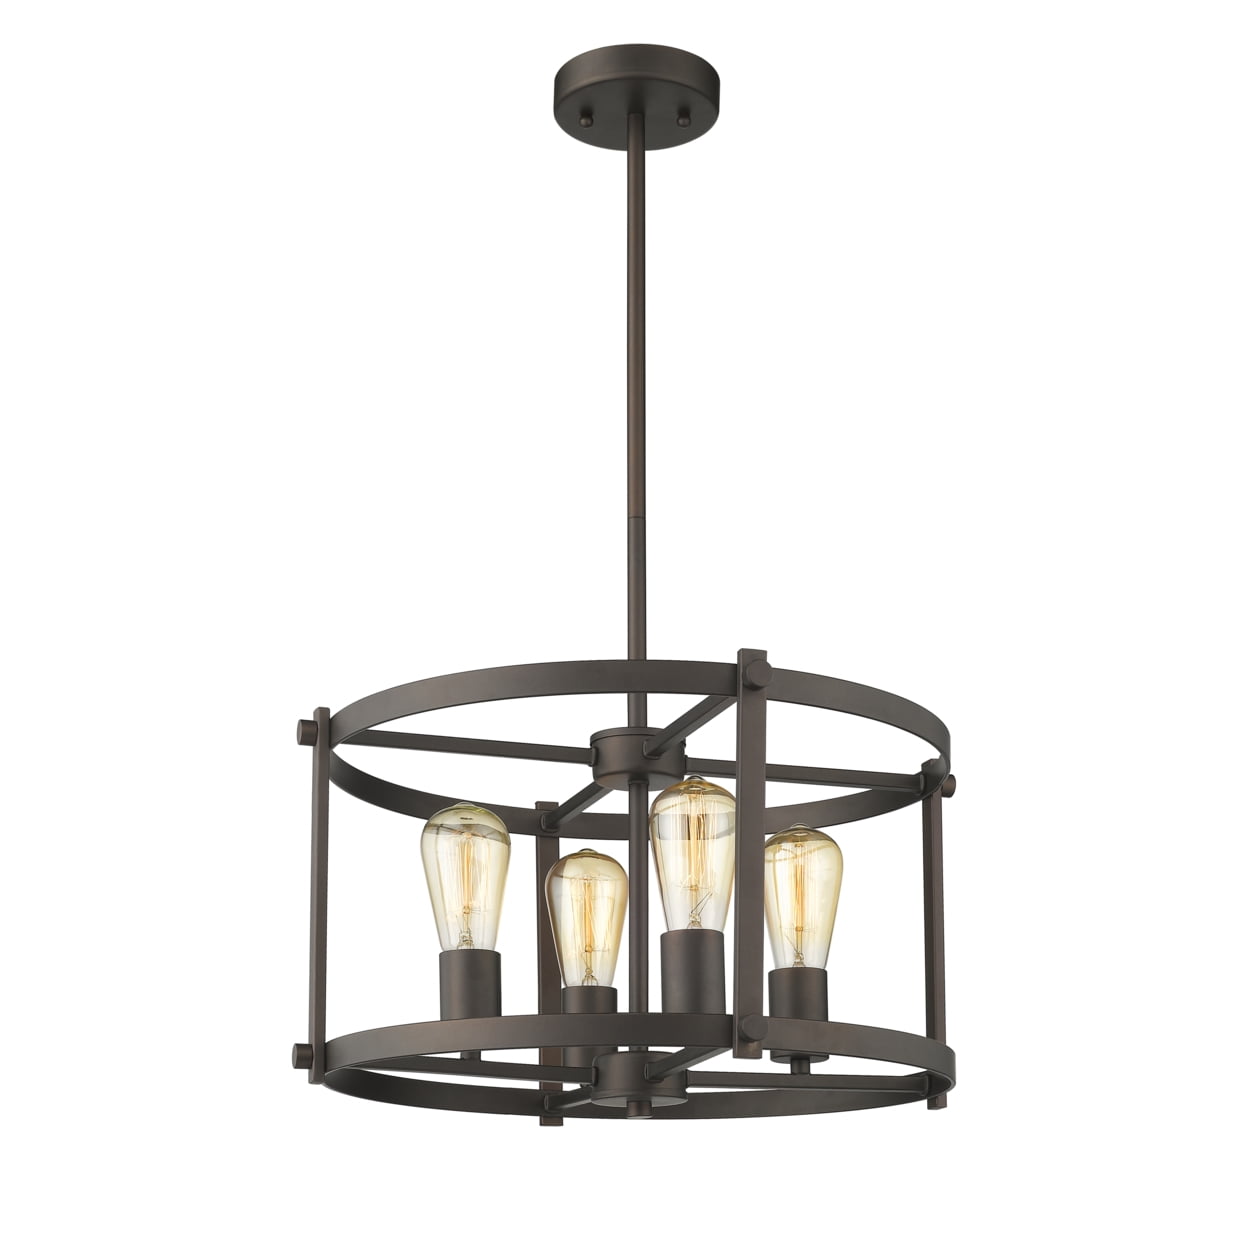 Ch2h119rb18-up4 Ironclad Farmhouse 4 Light Rubbed Bronze Convertible Ceiling Pendant - 17.5 In.